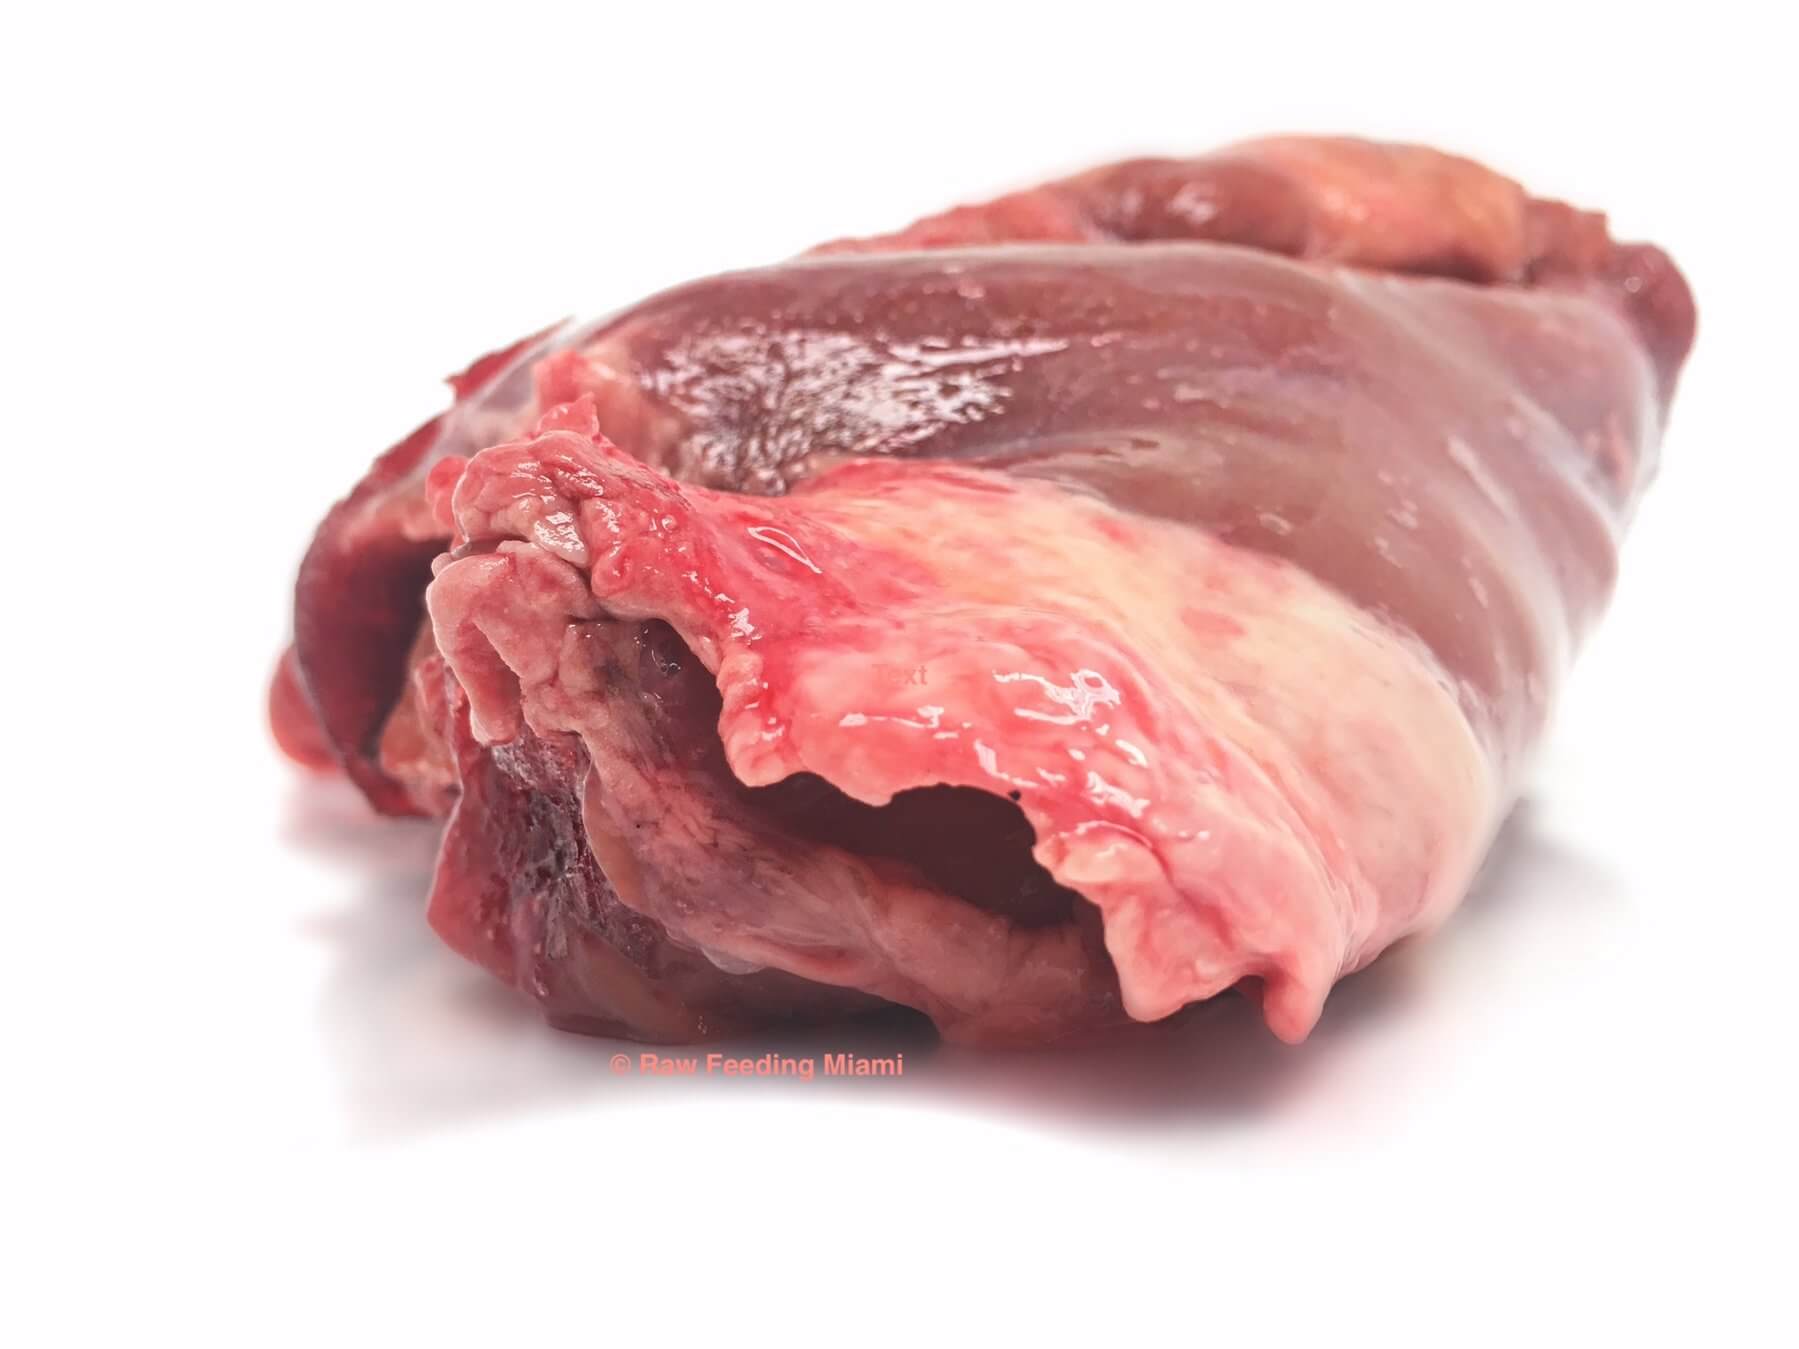 A picture of beef pancreas.